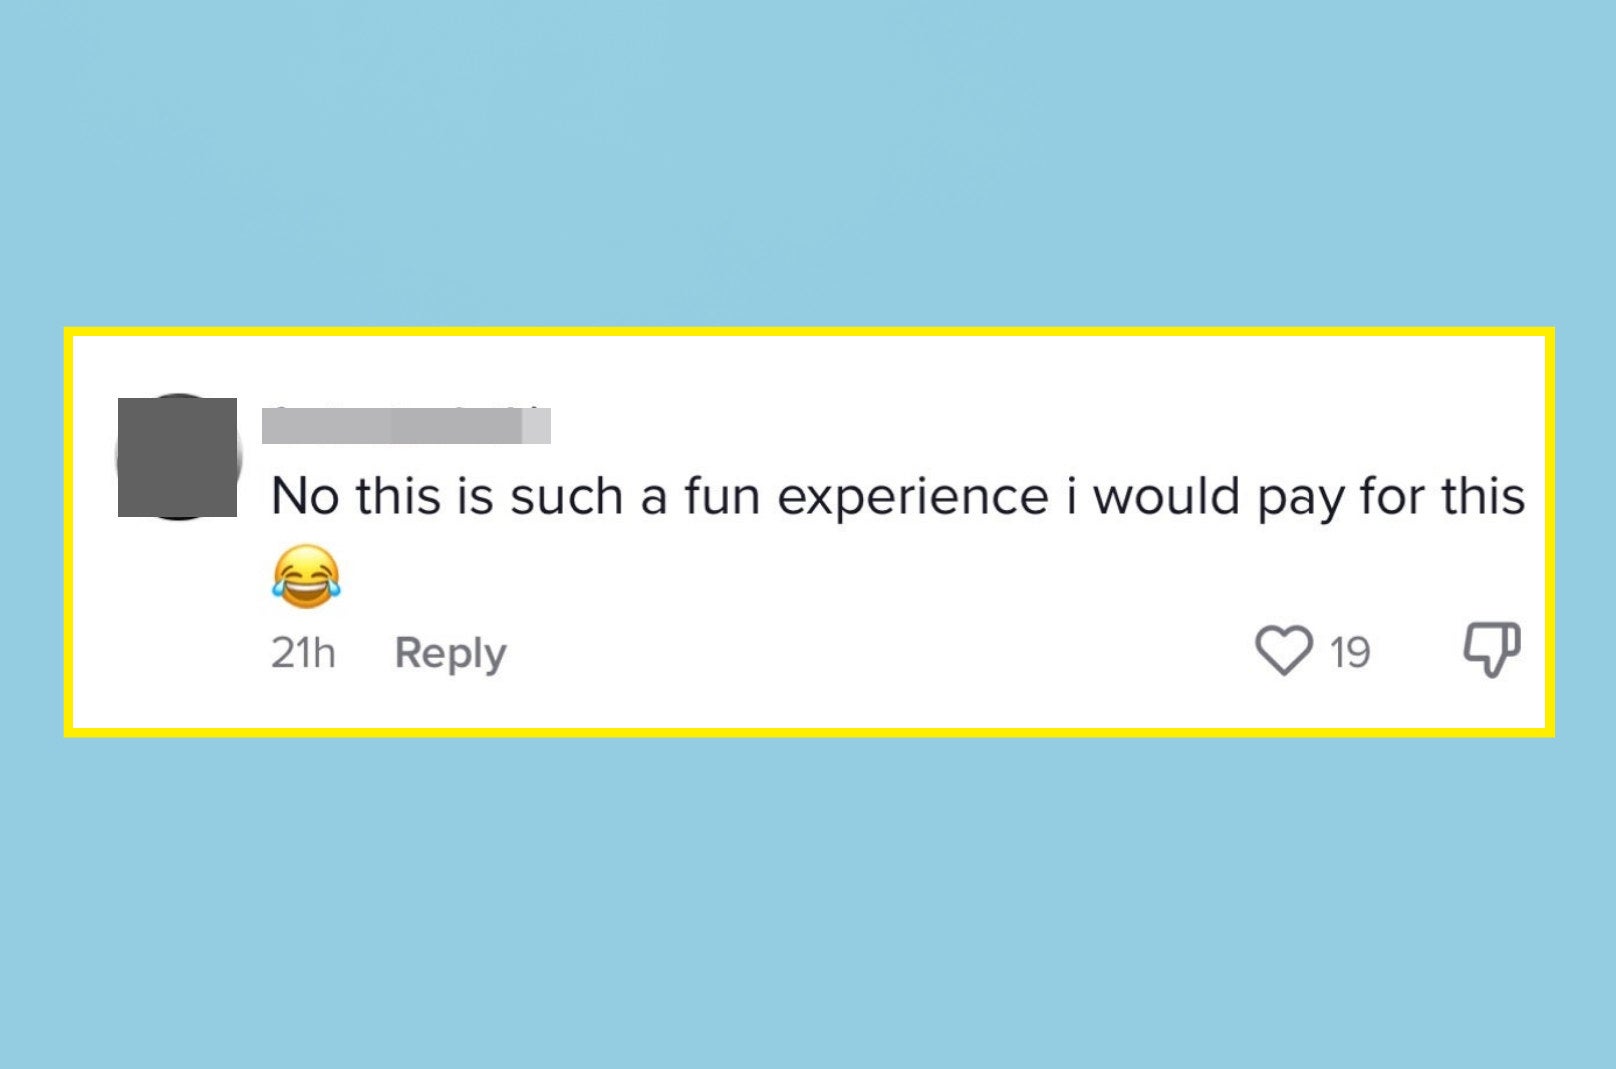 Comment saying &quot;No this is such a fun experience i would pay for this&quot; with a laughing emoji